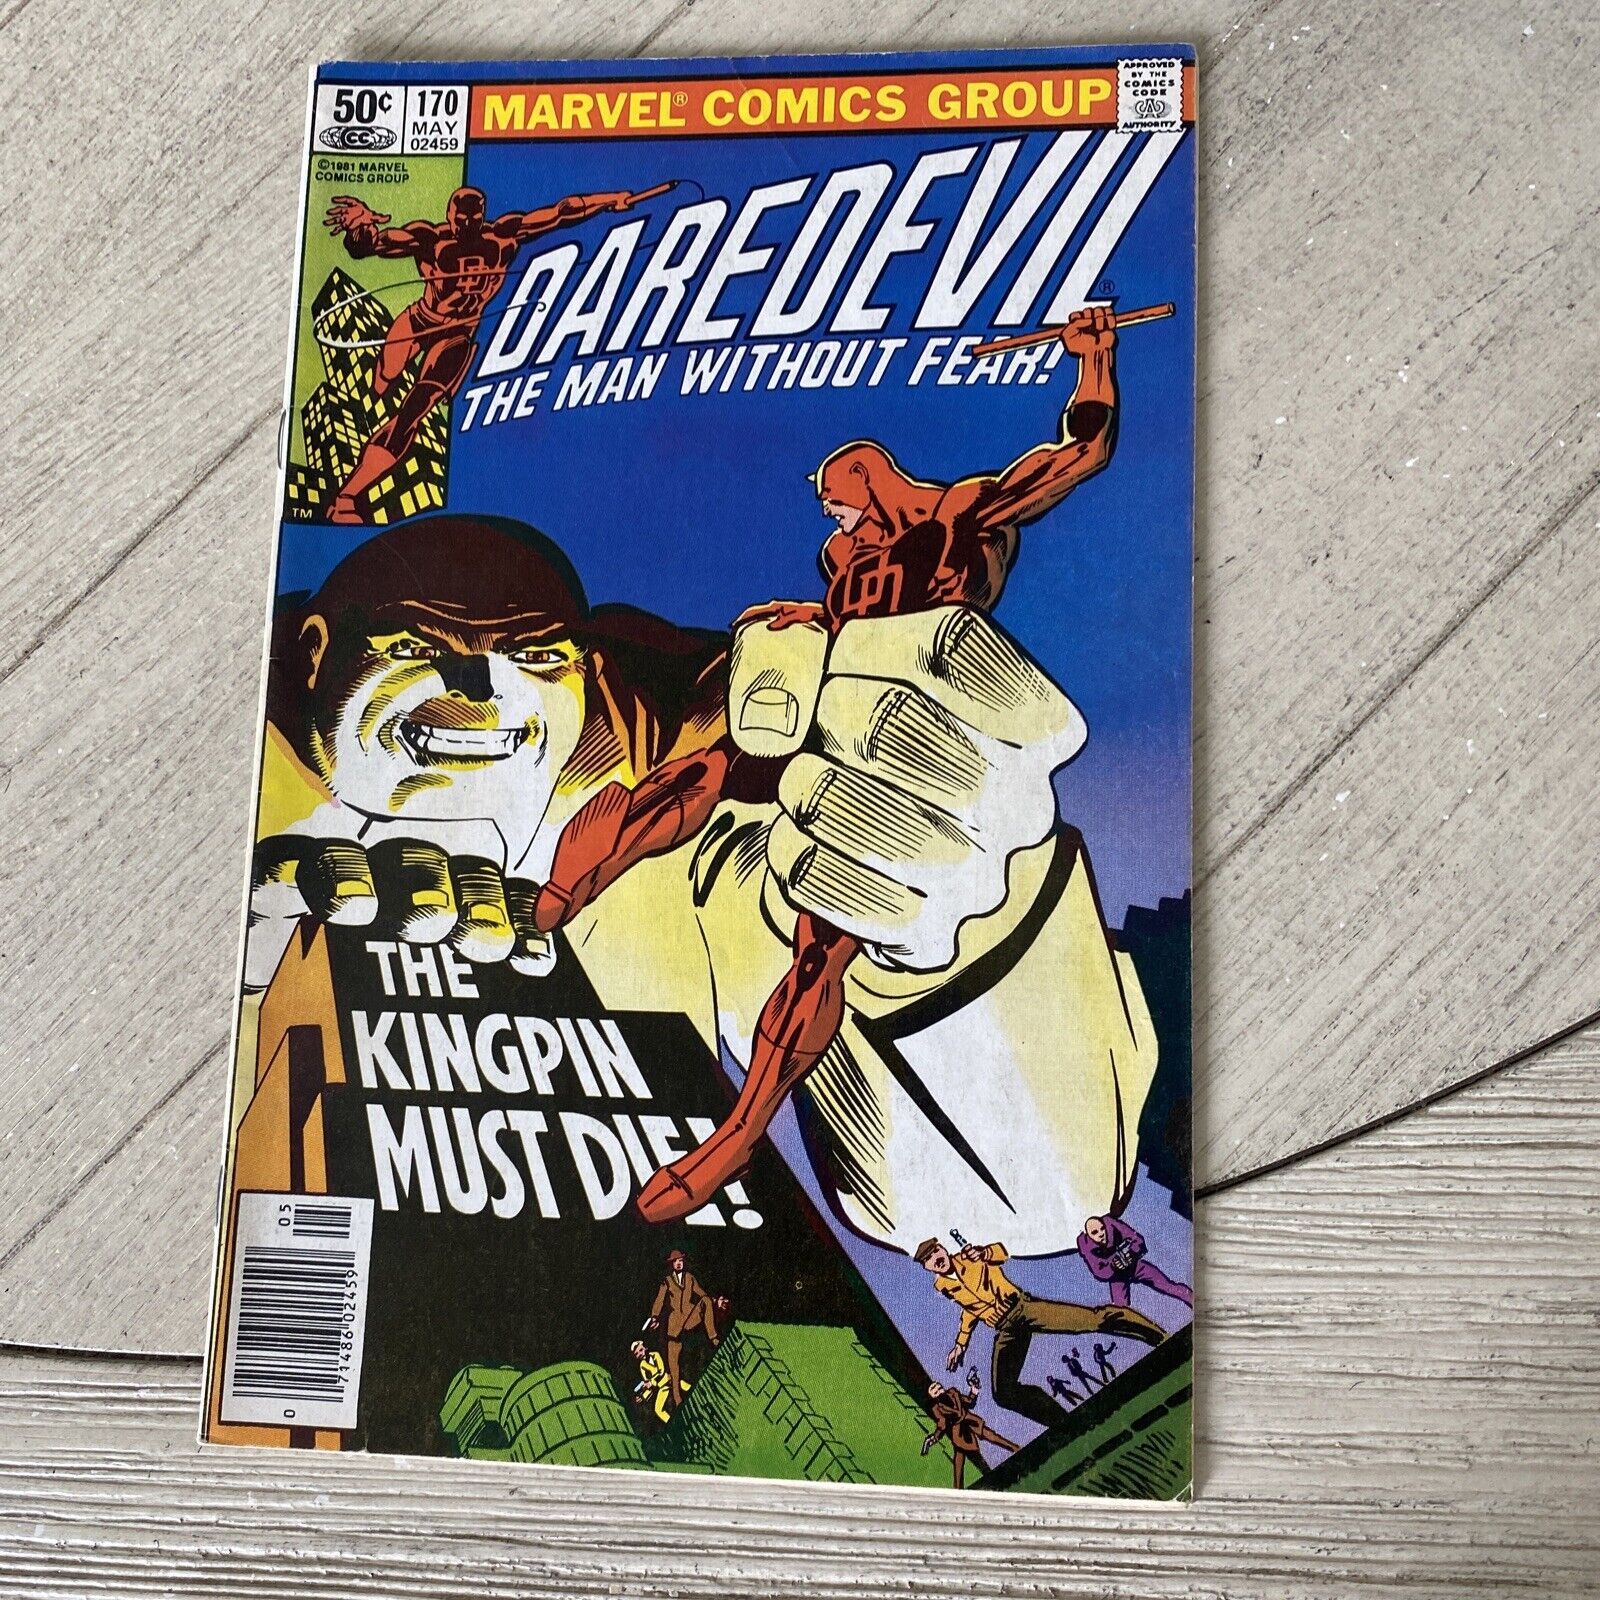 1981 marvel comics daredevil the man without fear issue number 170